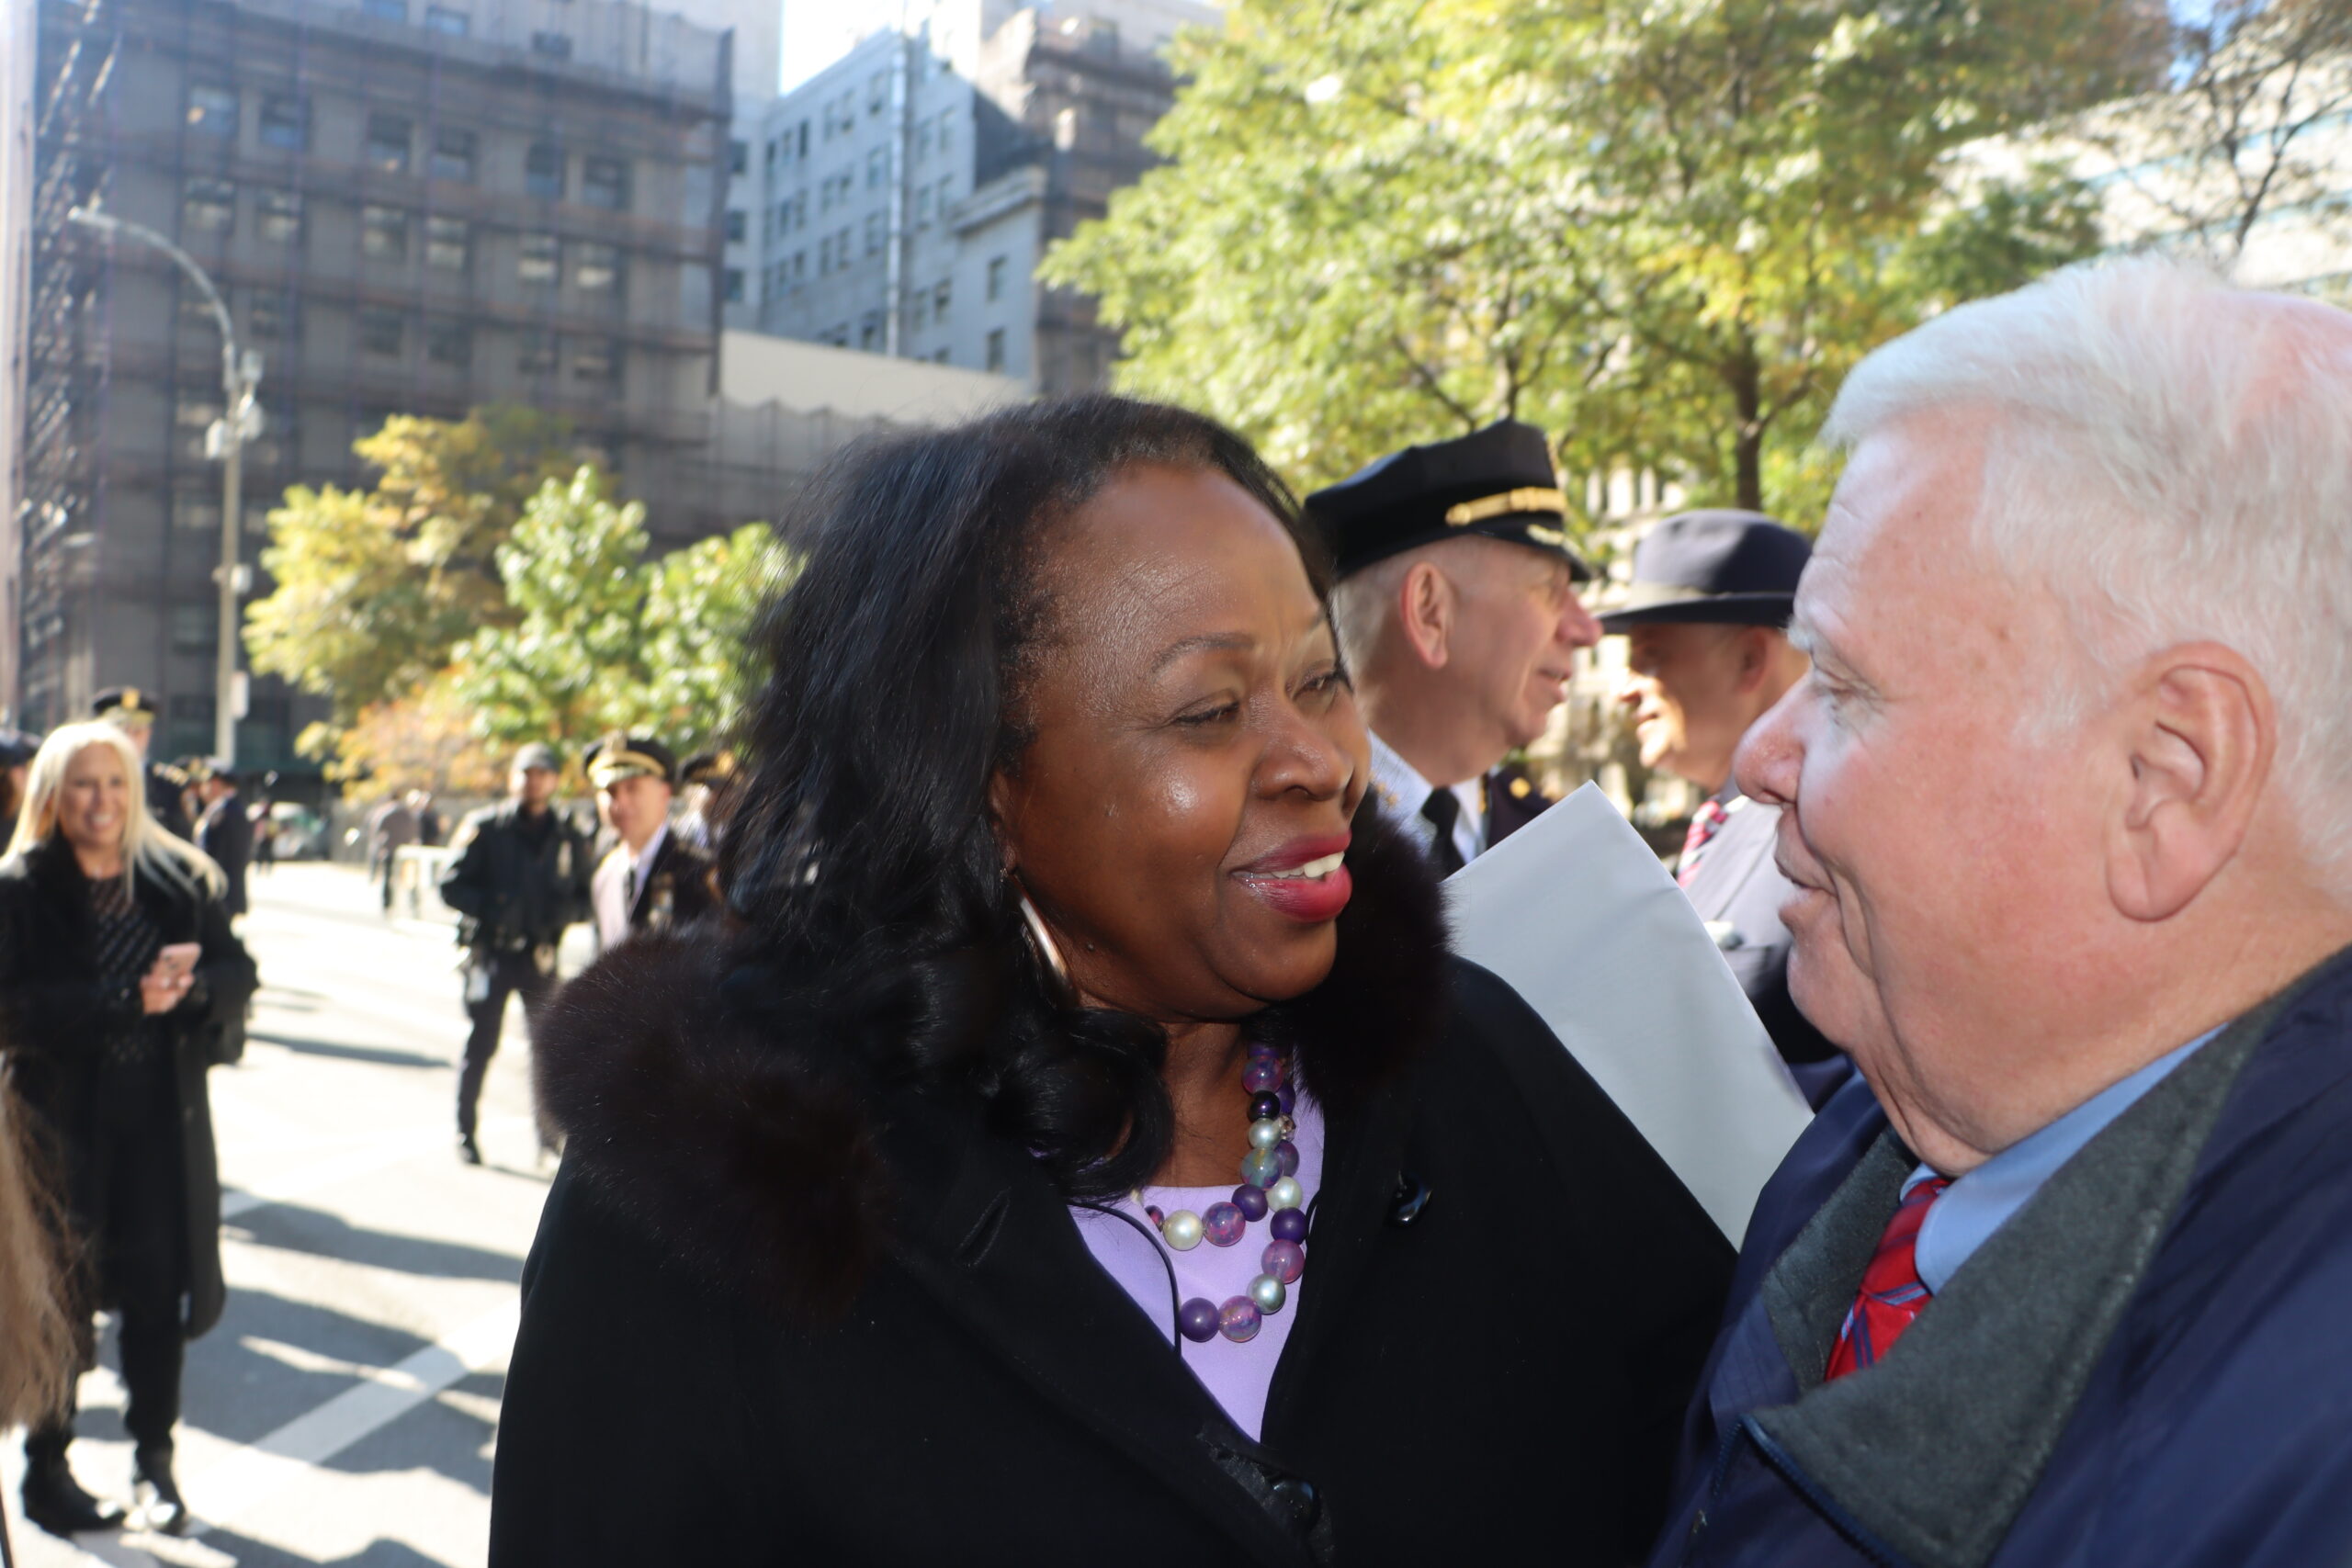 Hon. Sylvia Hinds-Radix, former administrative judge and NYC Corporation Counsel, shares a moment with Dennis Quirk at his retirement ceremony.